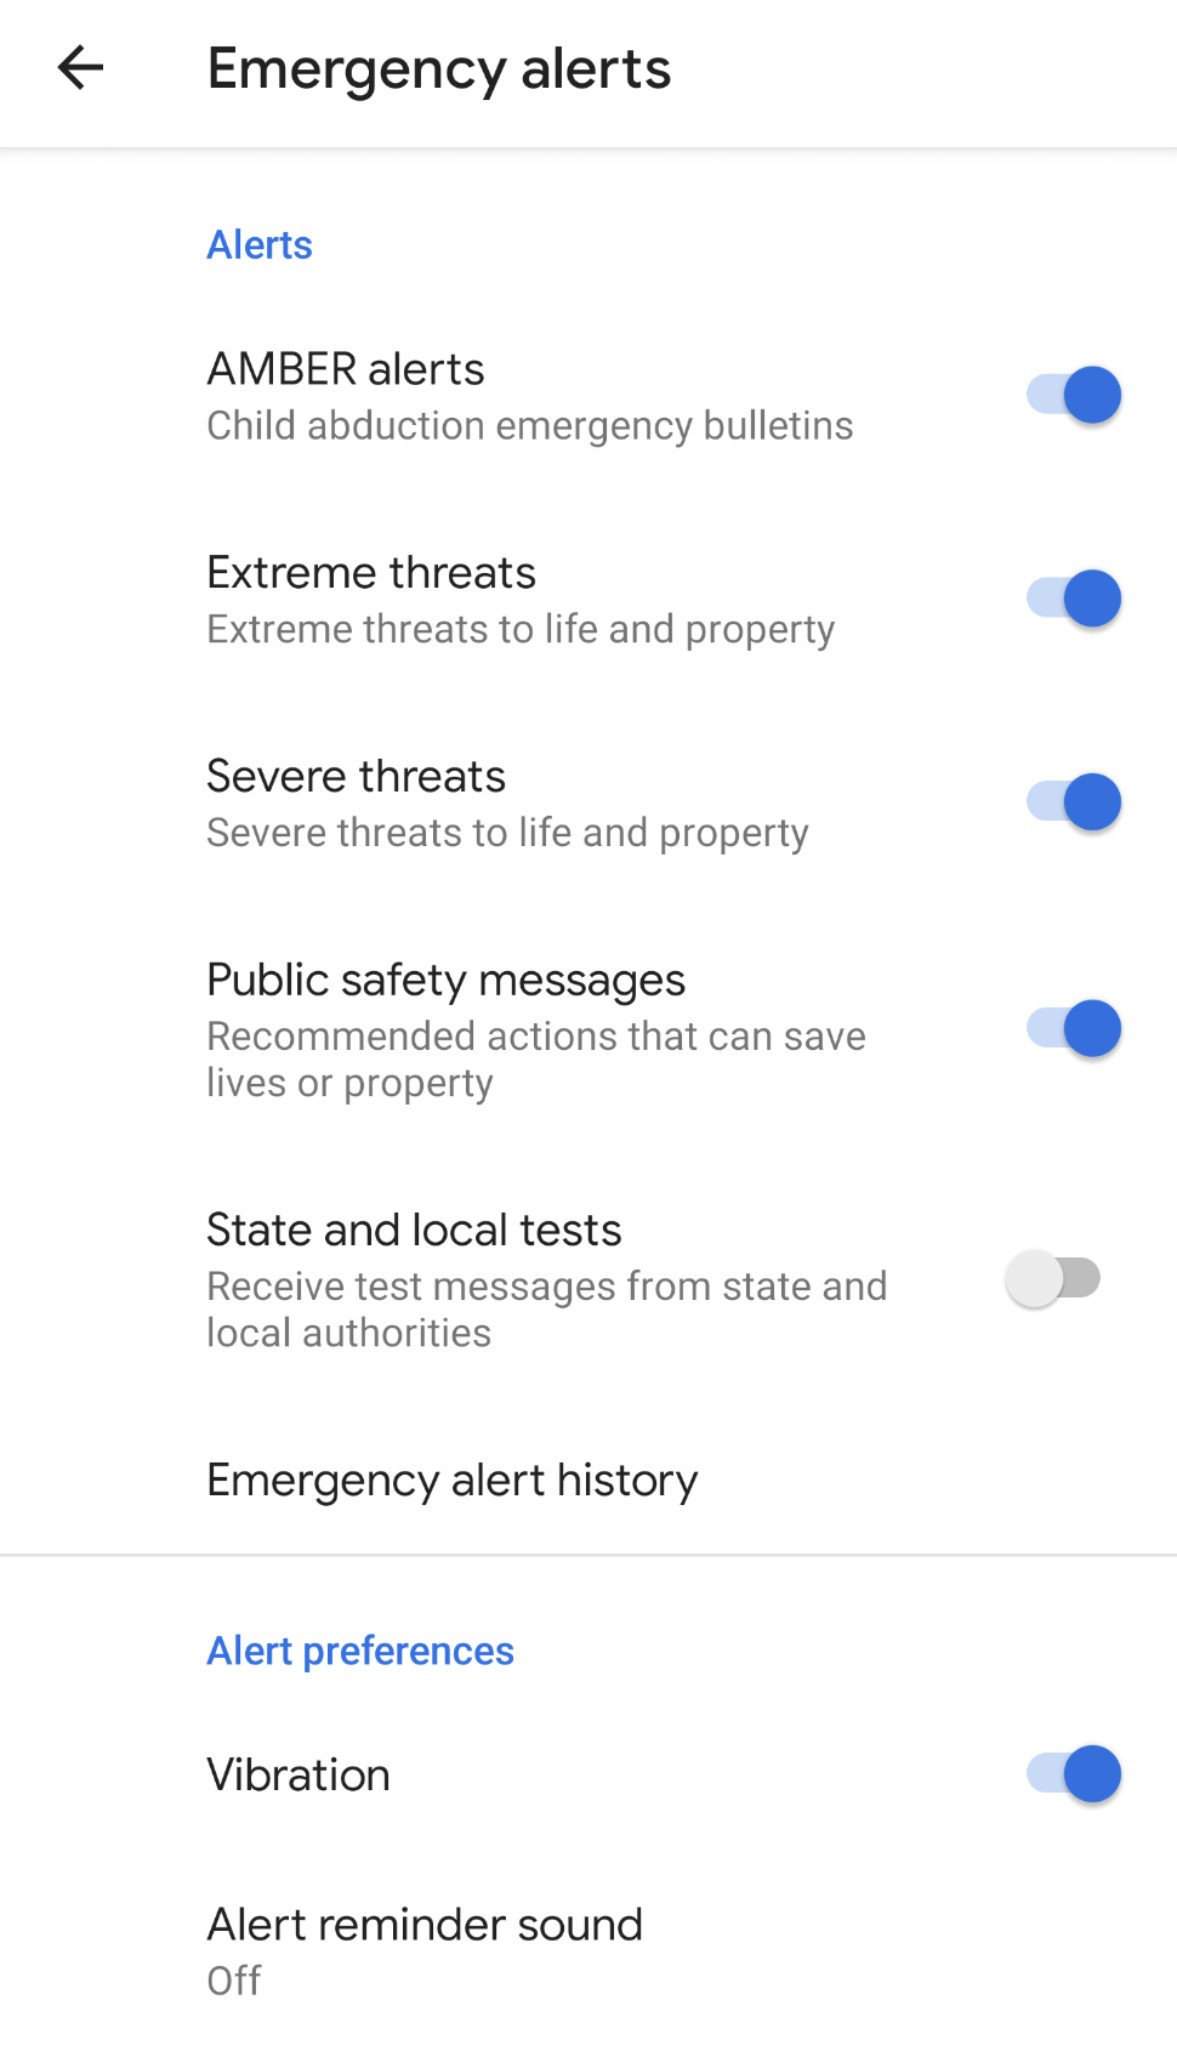 Emergency alert settings on Android 10